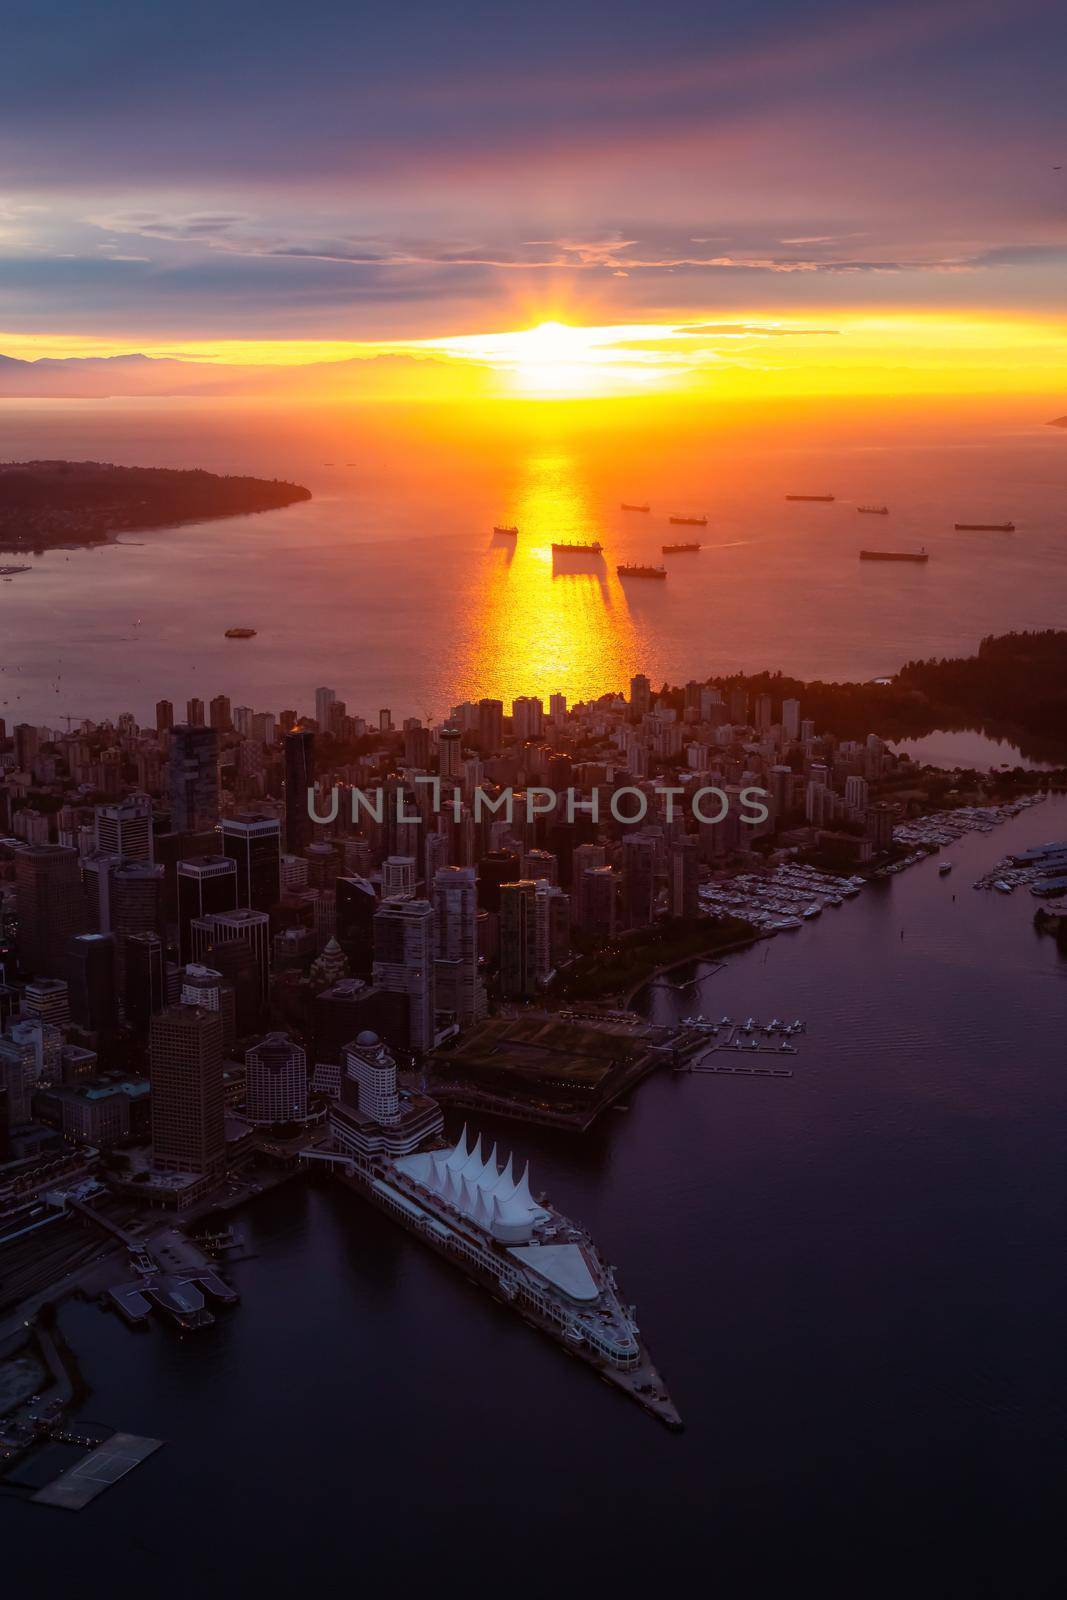 Aerial view of Downtown City during a striking and dramatic sunset. Taken in Vancouver, British Columbia, Canada.